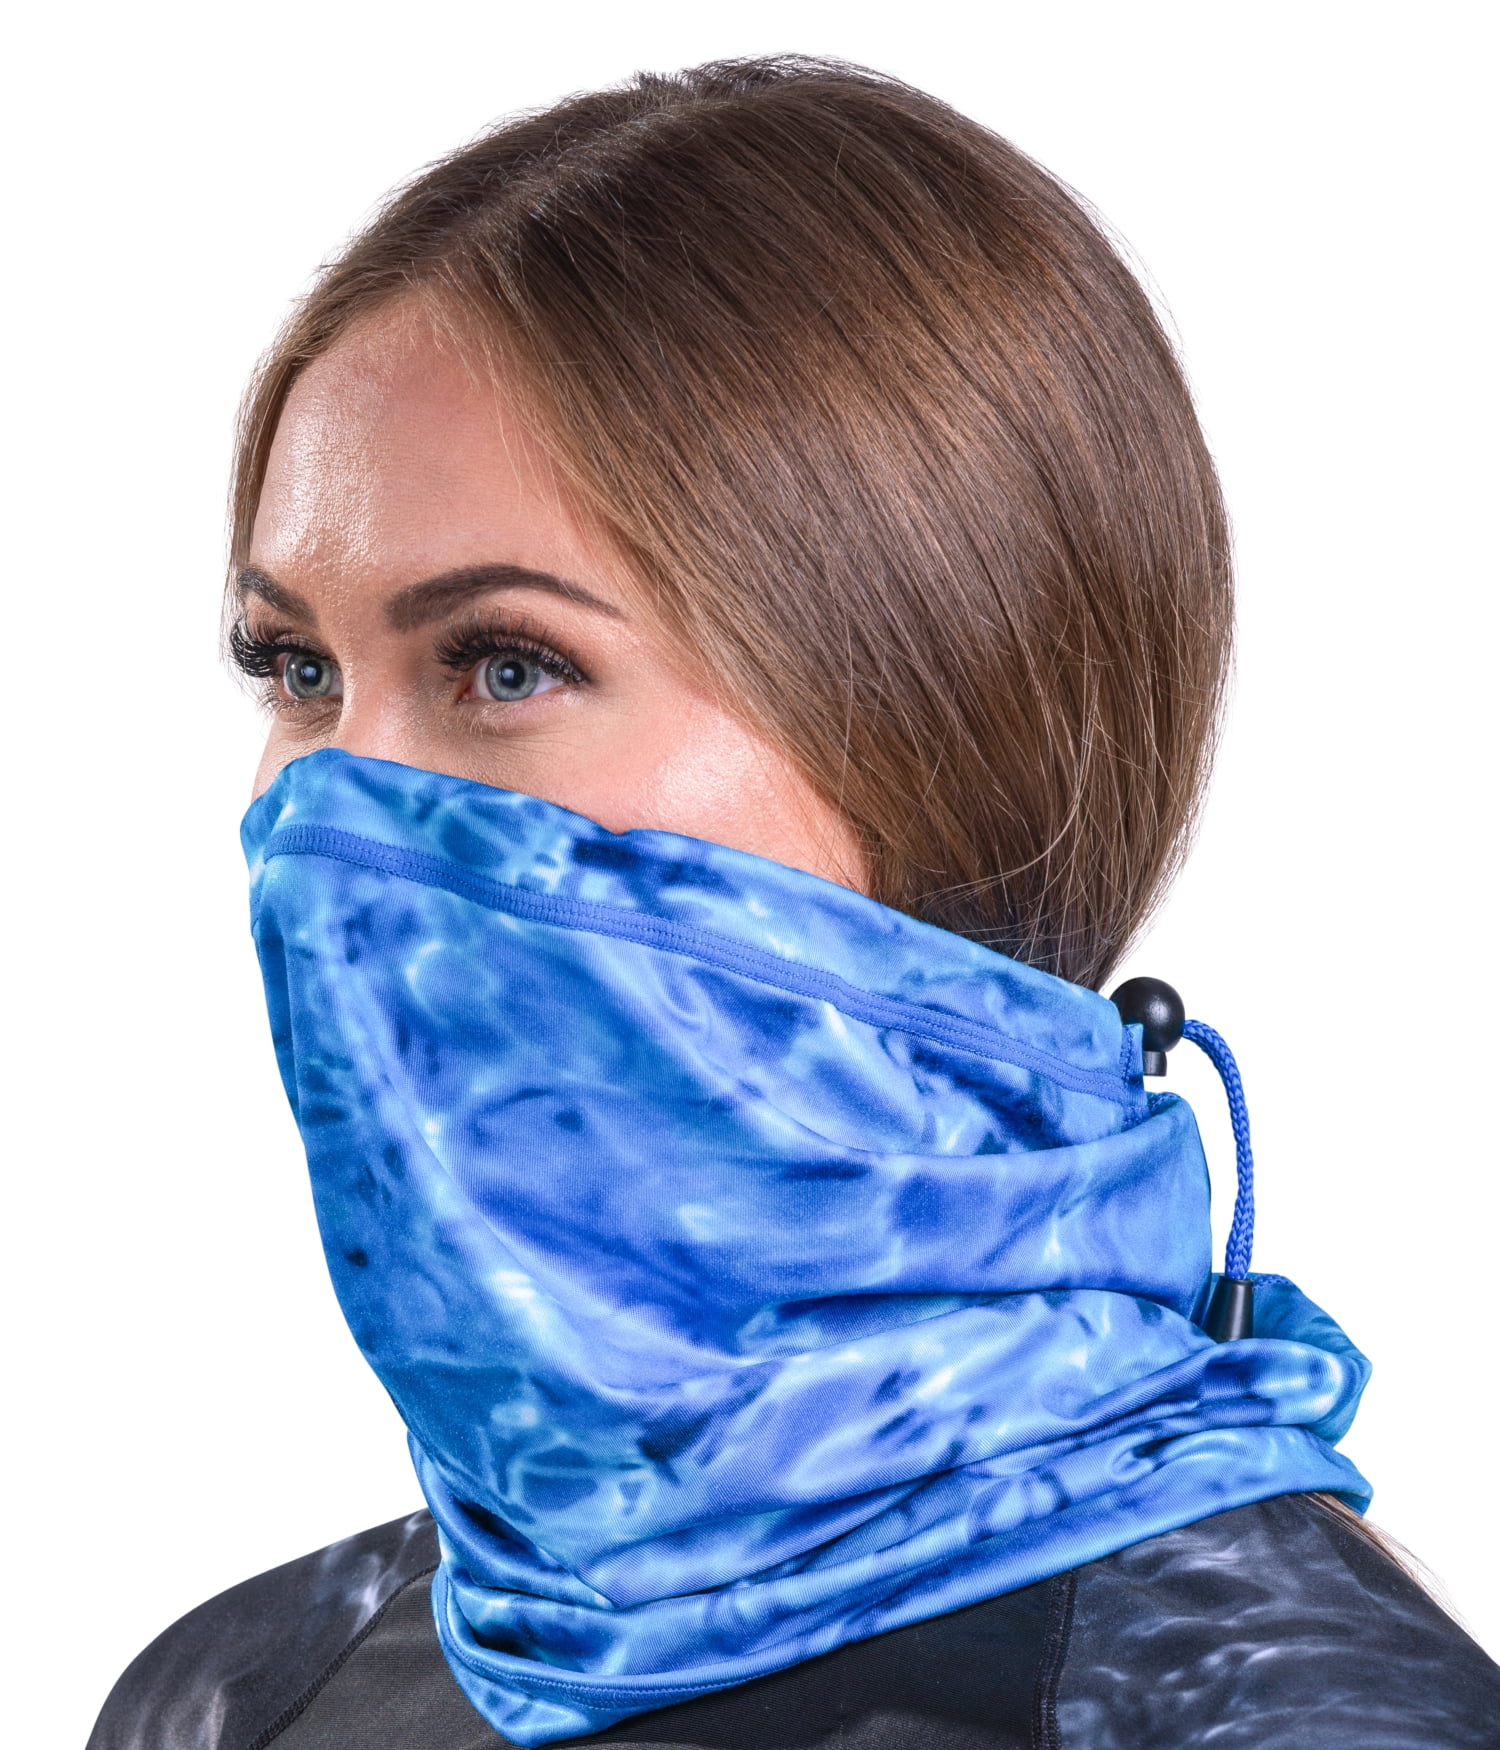 ASDAH Flowery Bright Flowers Bandana Face UV Sun Protection Cover Neck Gaiter Half Face Cover Face Scarf for Outdoor Running^4 